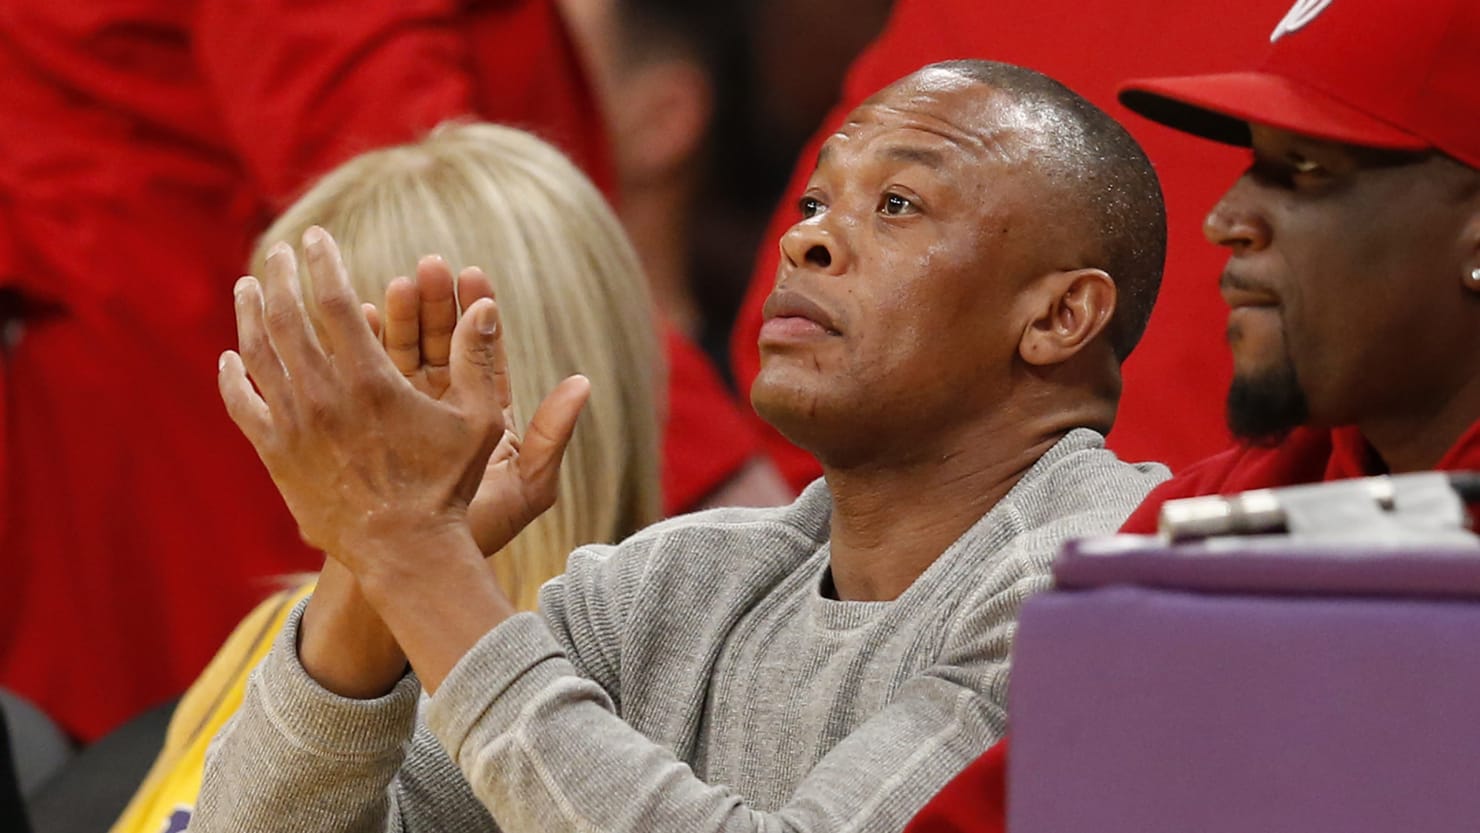 Dr. Dre to Drop First Album in 16 Years